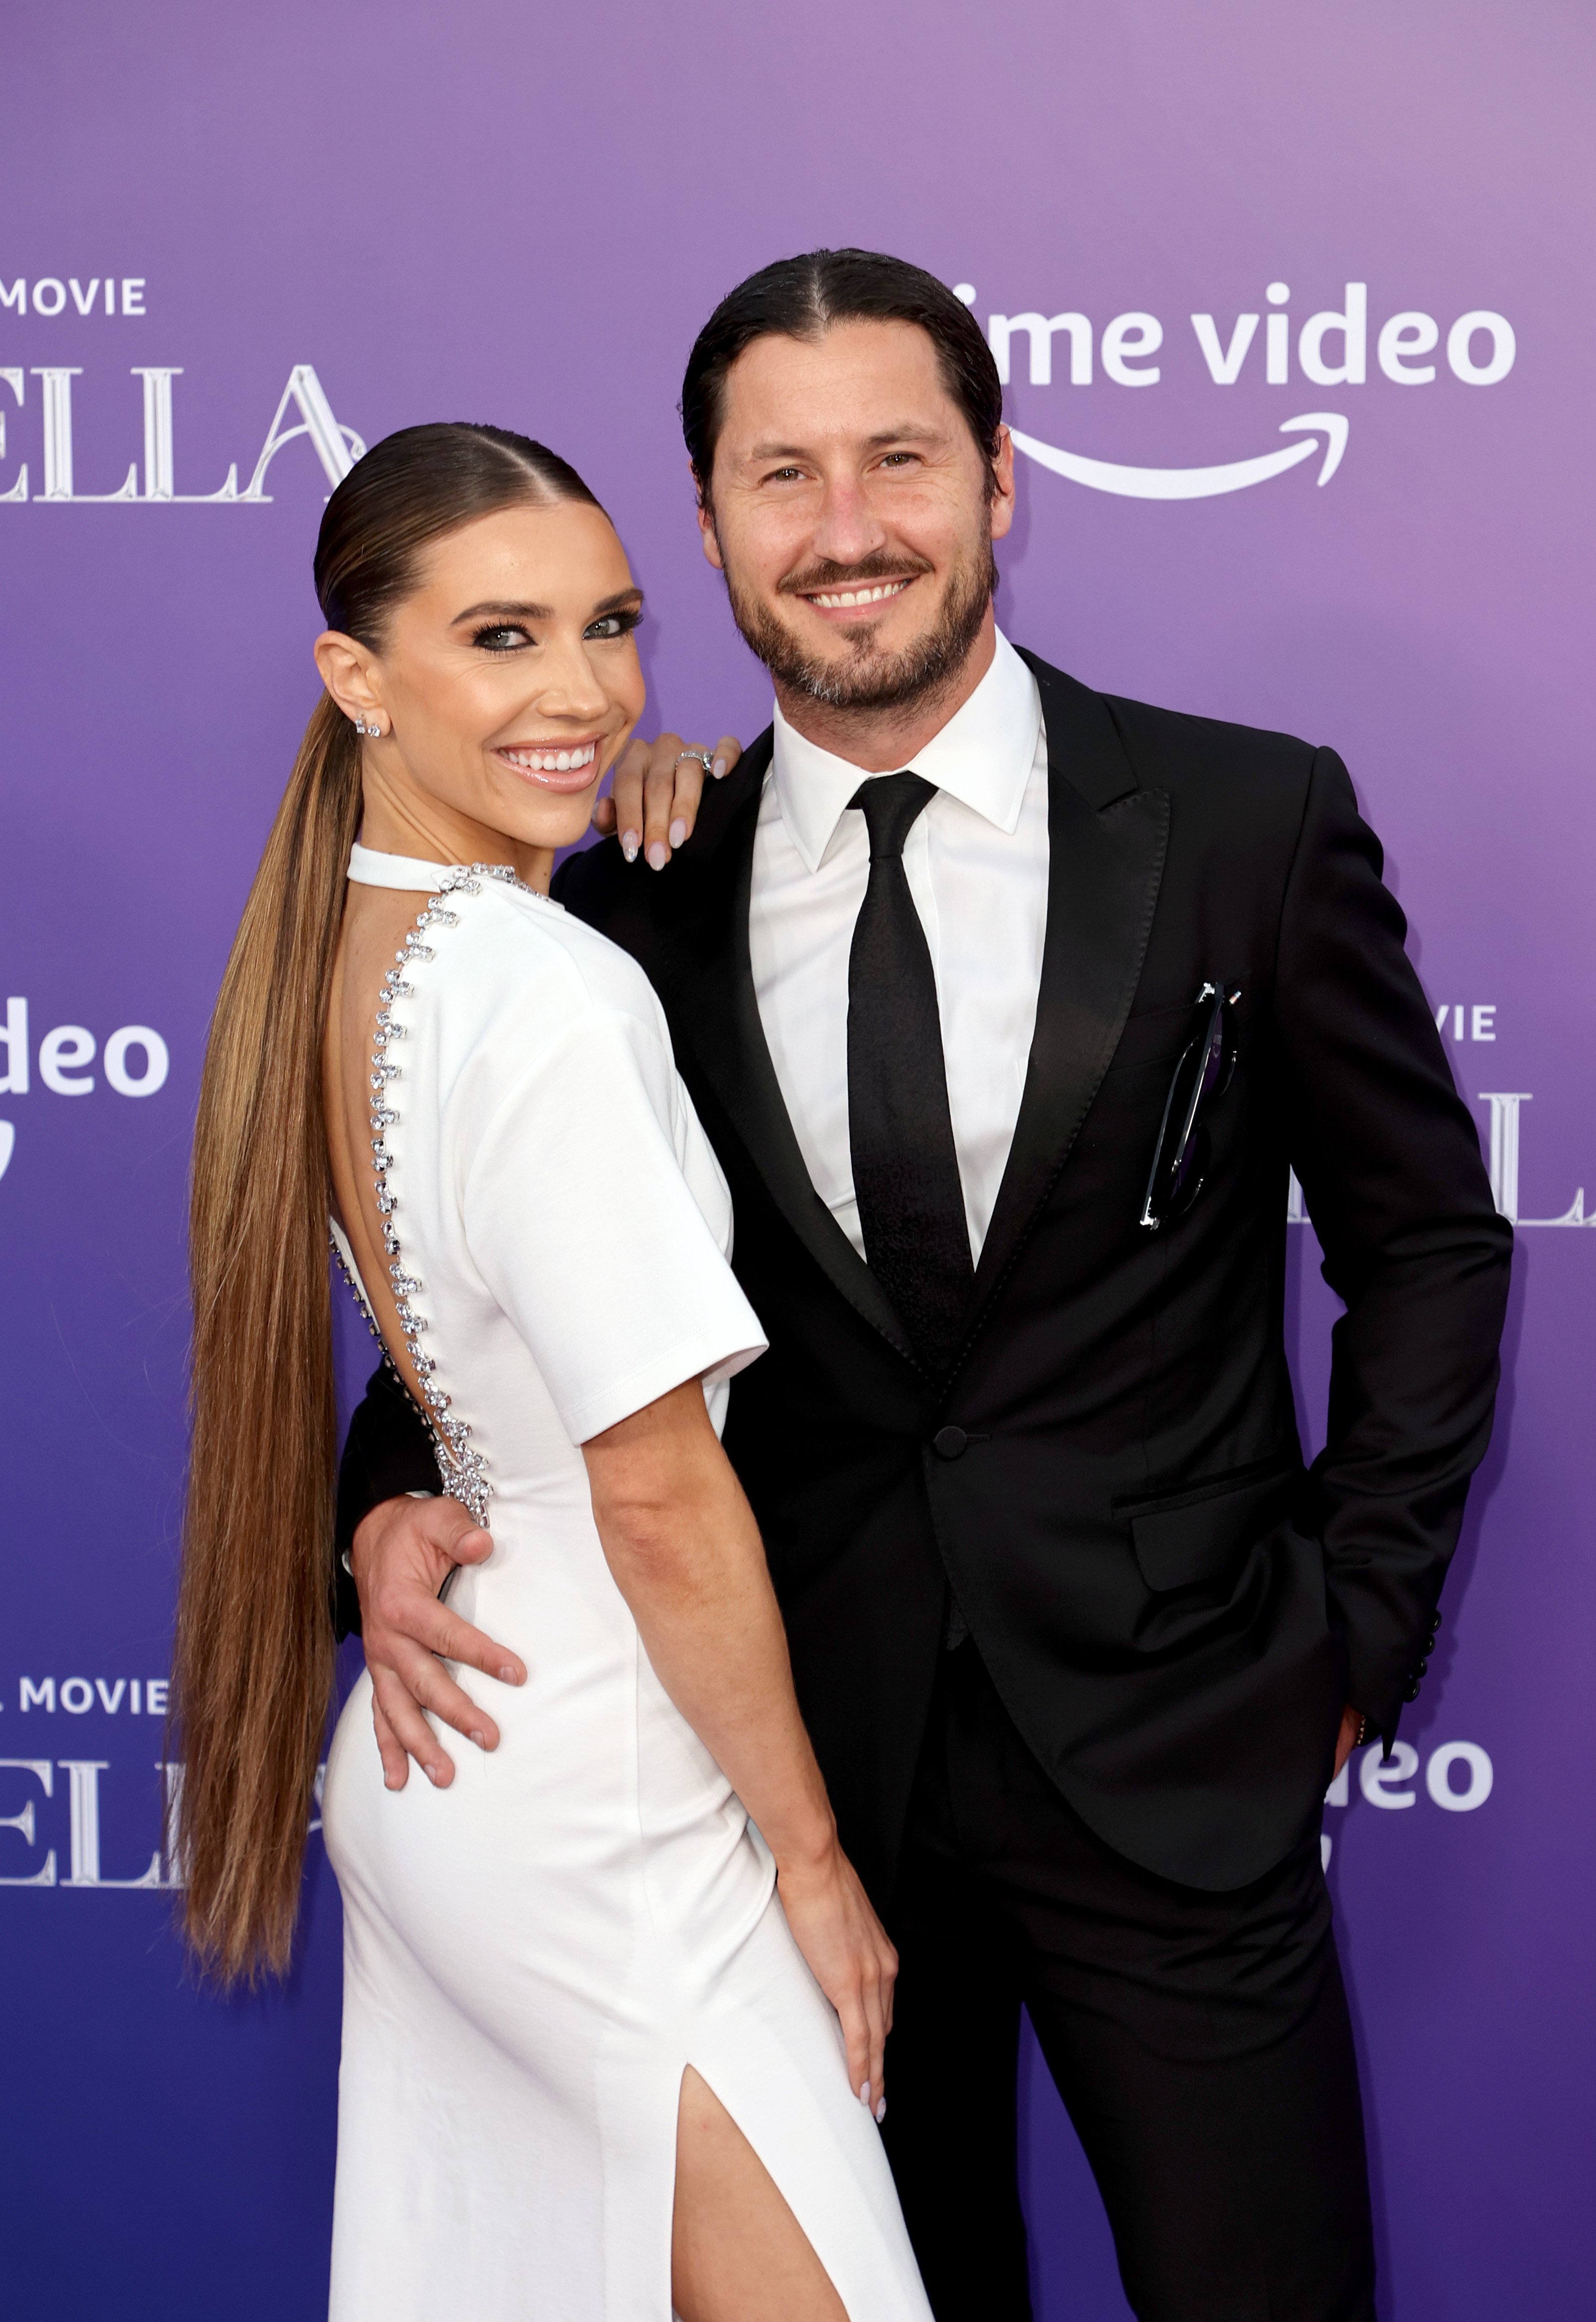 Jenna Johnson and Val Chmerkovskiy at the Los Angeles premiere of "Cinderella" on August 30, 2021, in California. | Source: Getty Images